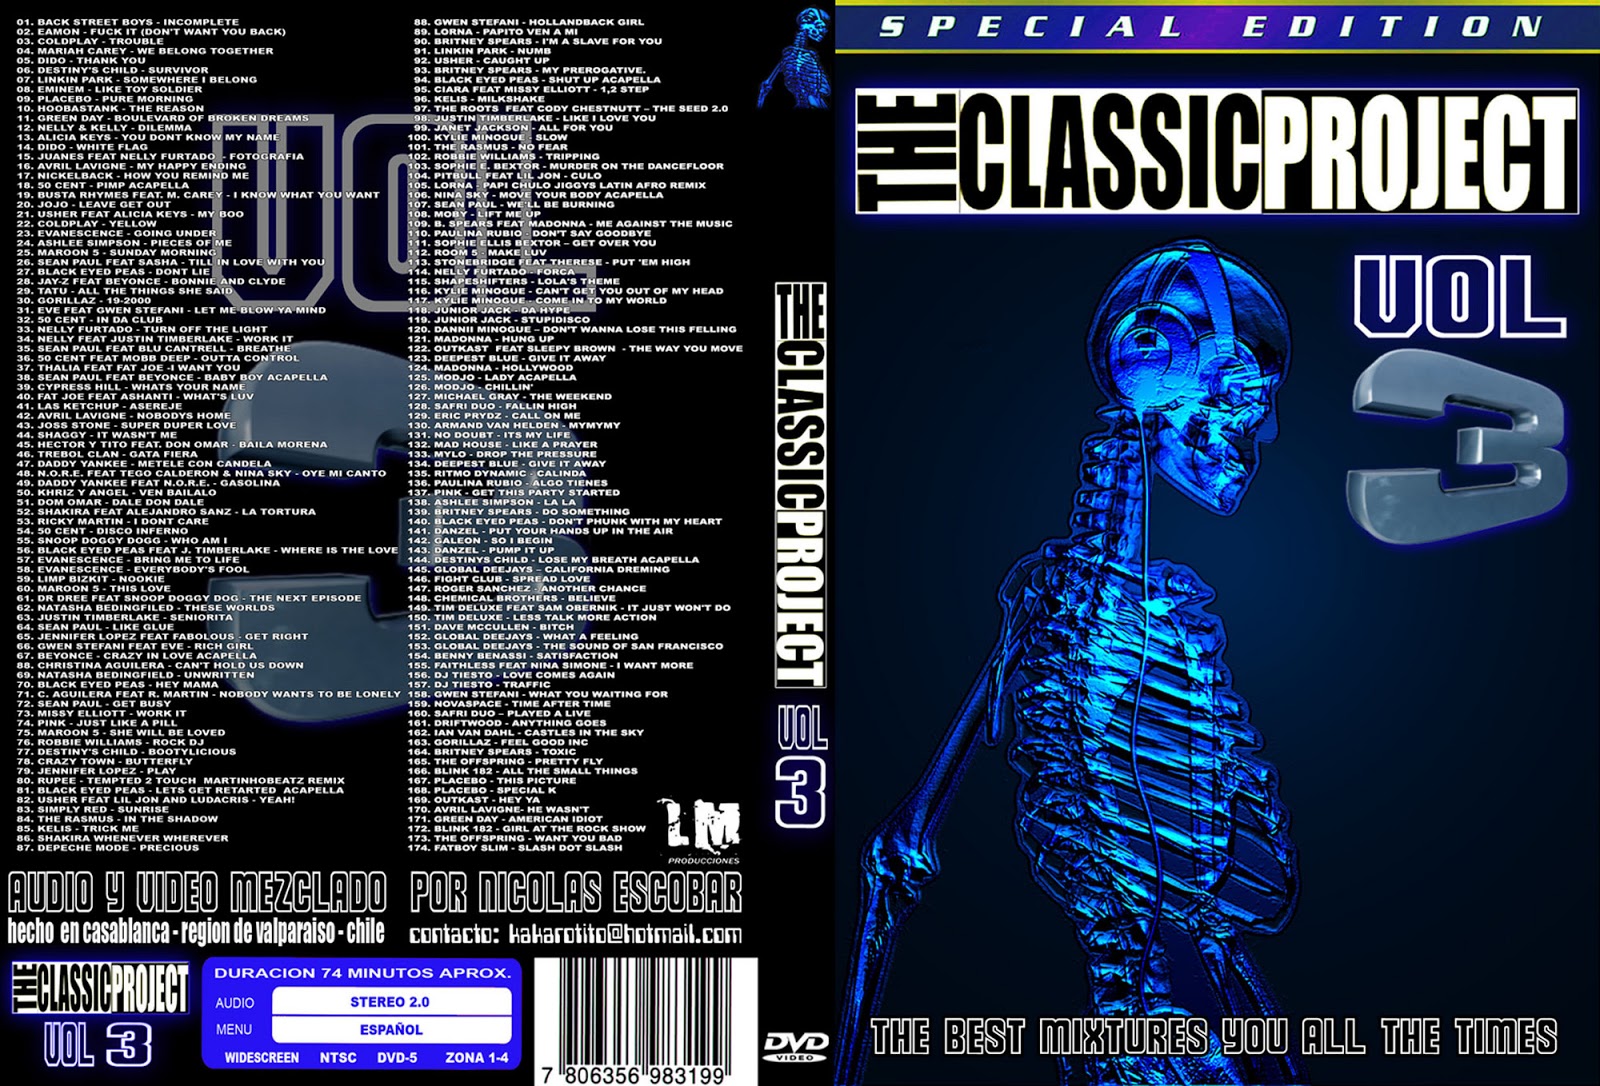 THE CLASSIC PROJECT 03 THE%2BCLASSIC%2BPROJECT%2B-%2BVOLUMEN%2B3